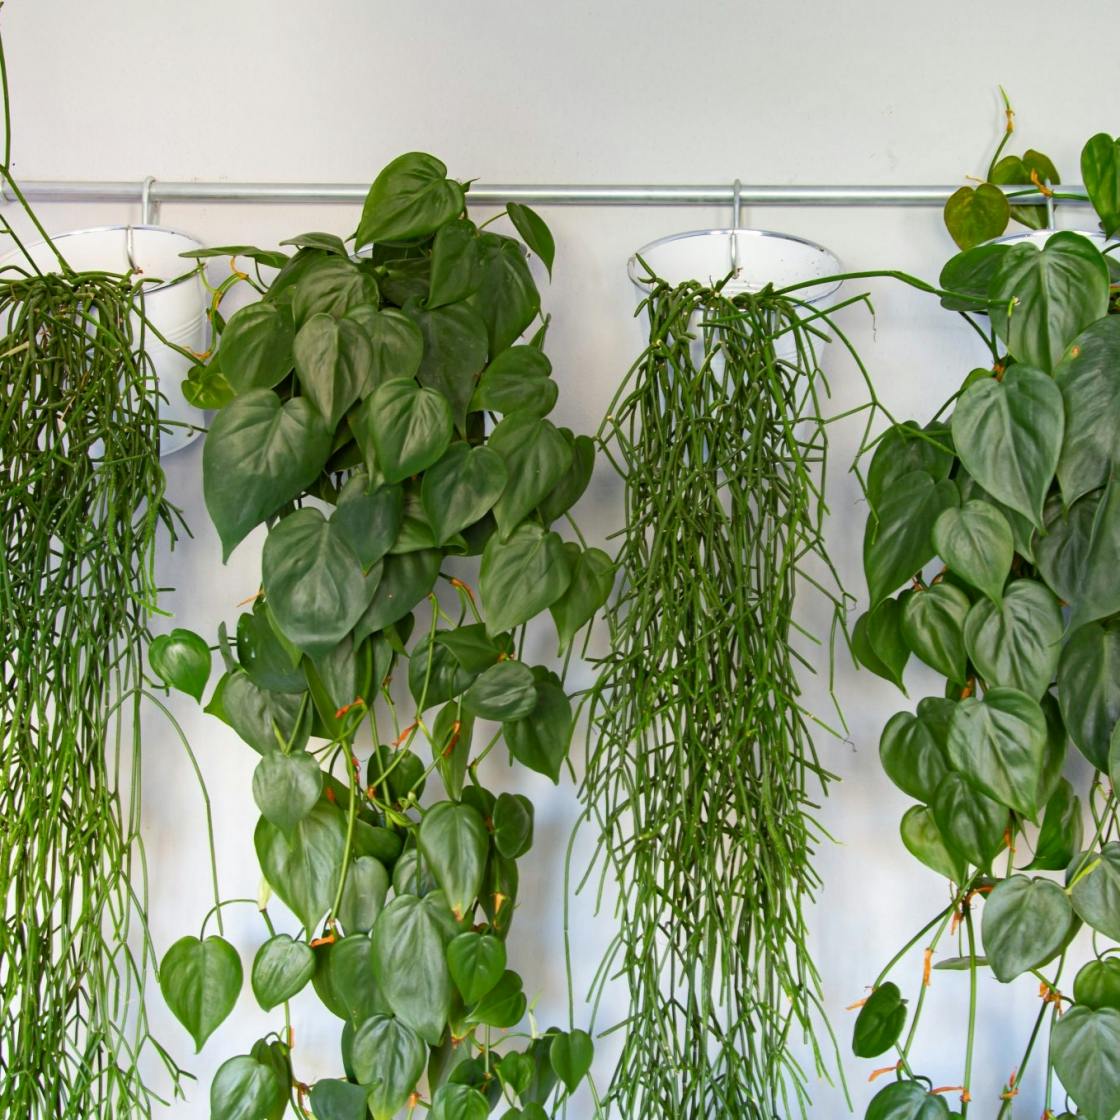 Trailing houseplants 10 hanging plants for an indoor jungle feel